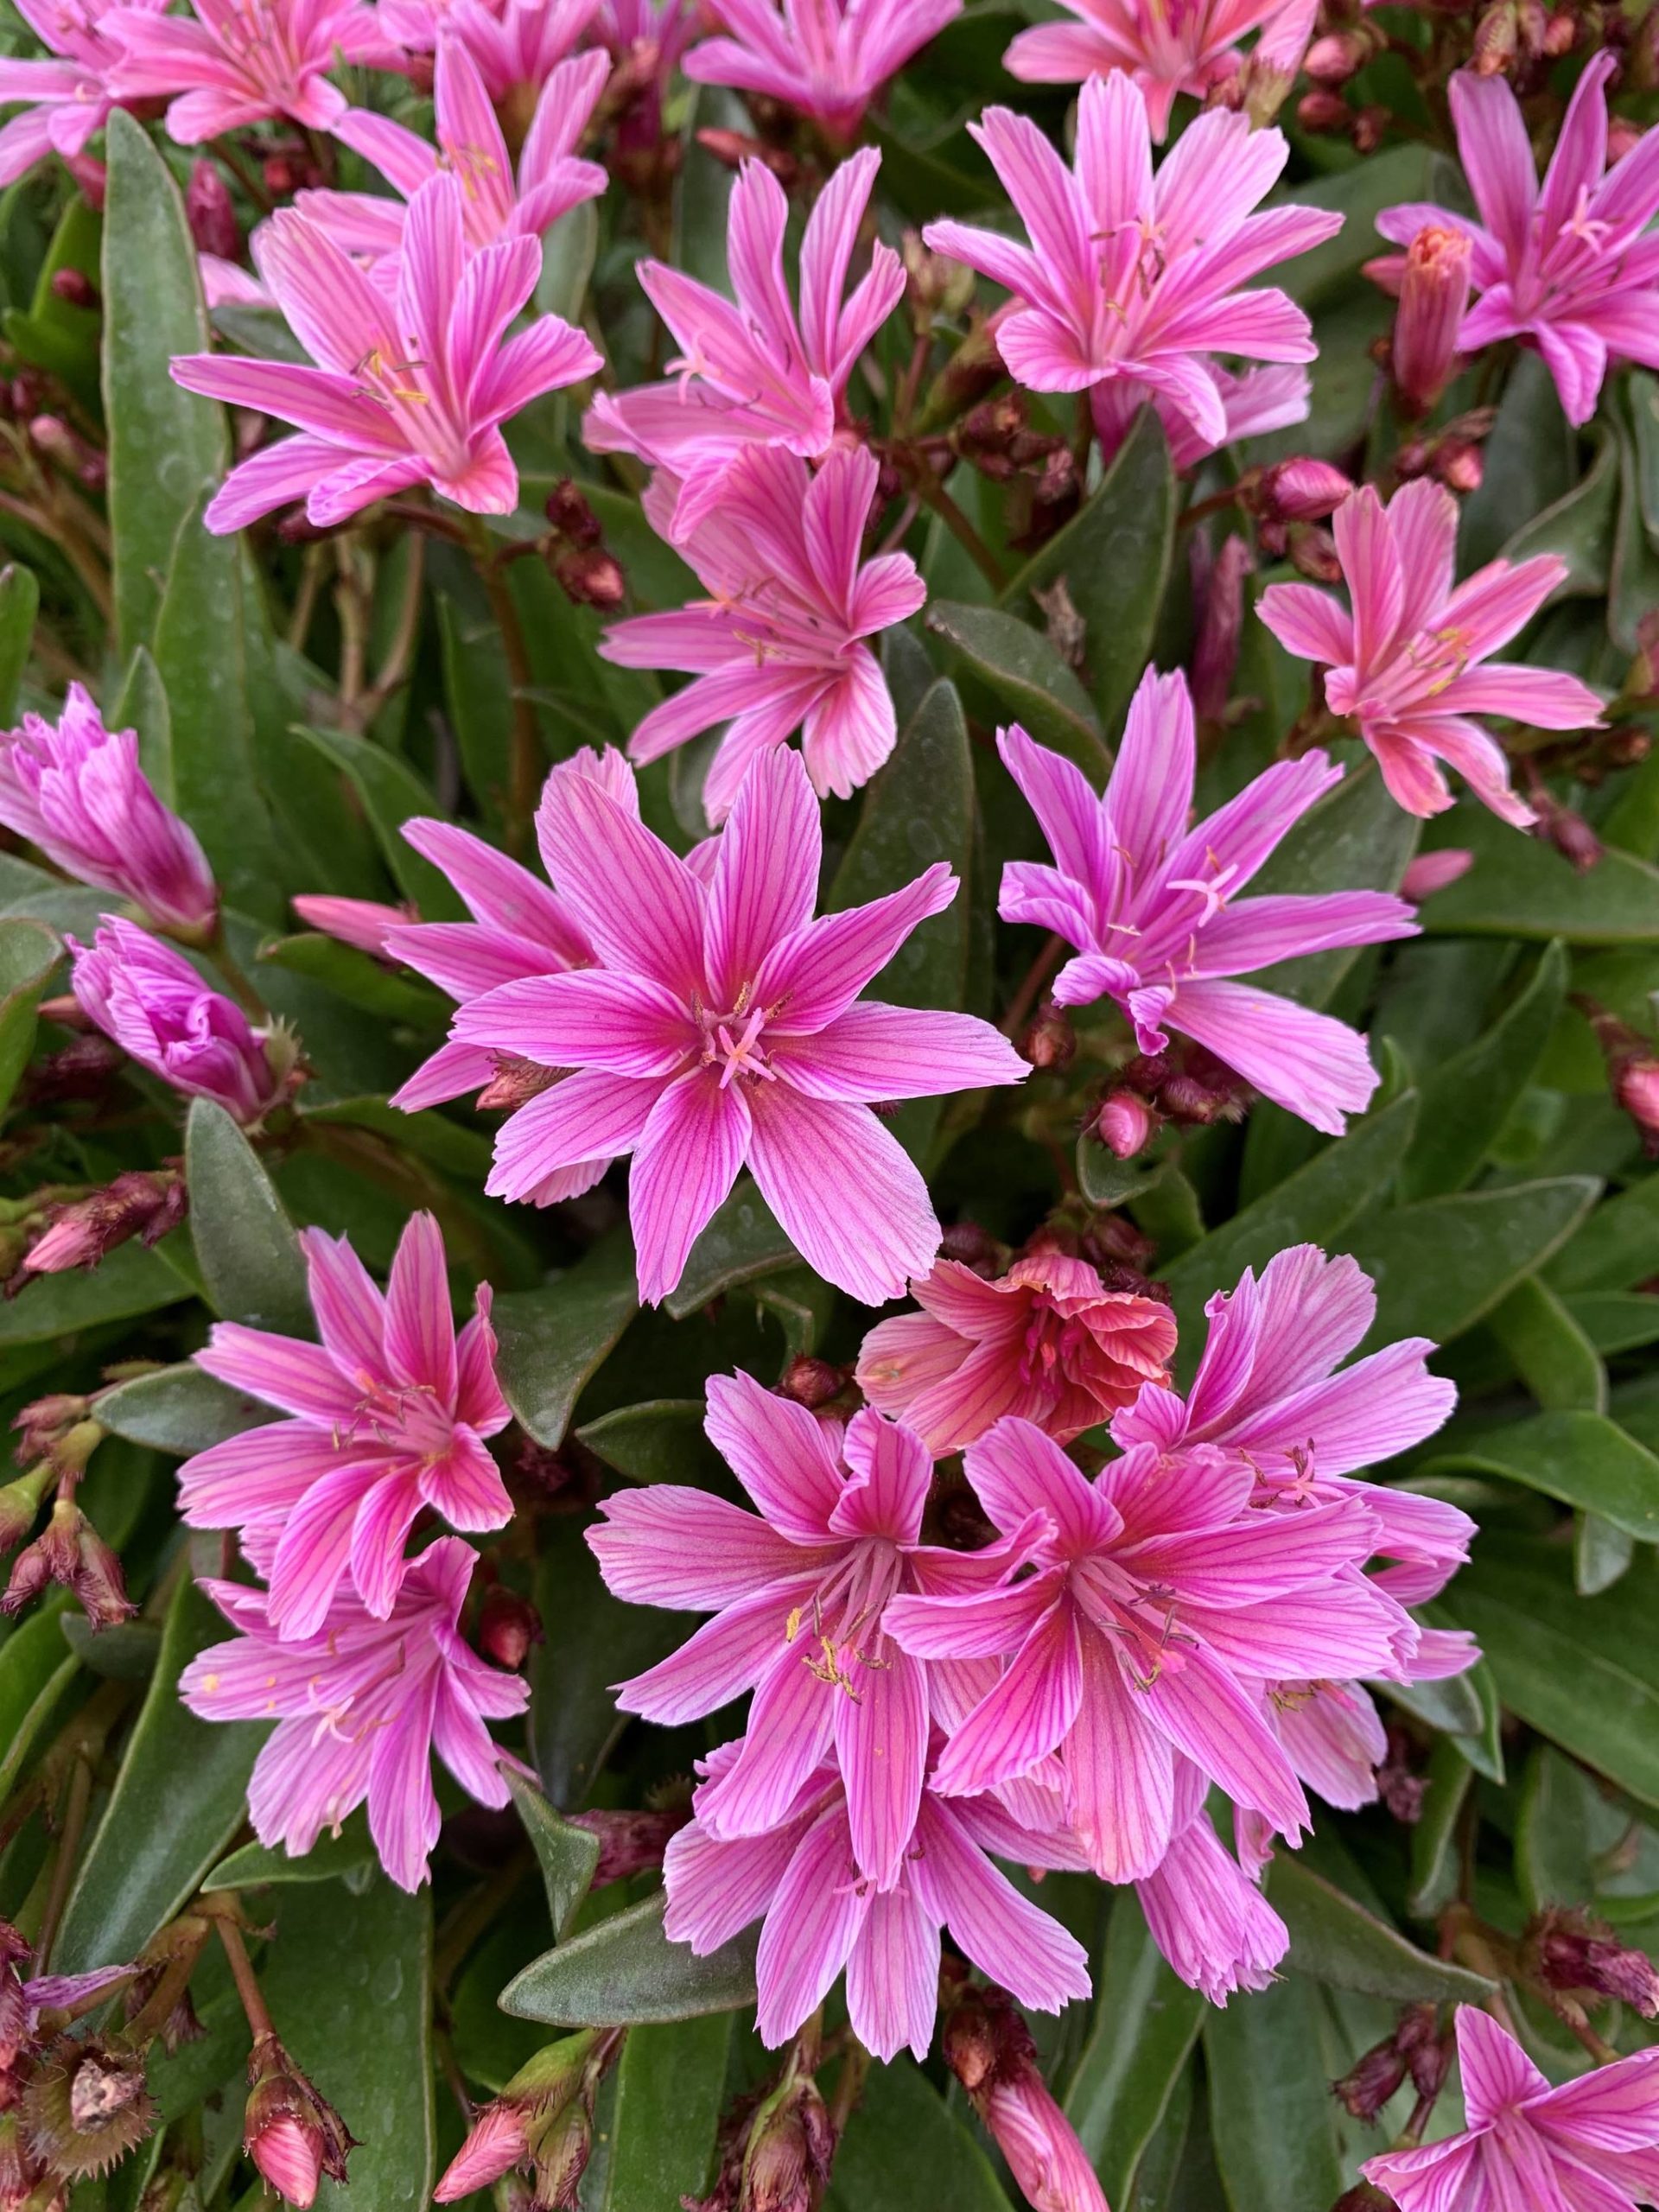 The lewisia is better in a rock garden but it has found a spot it loves and thrives, thankfully. (Photo by Rosemary Fitzpatrick)